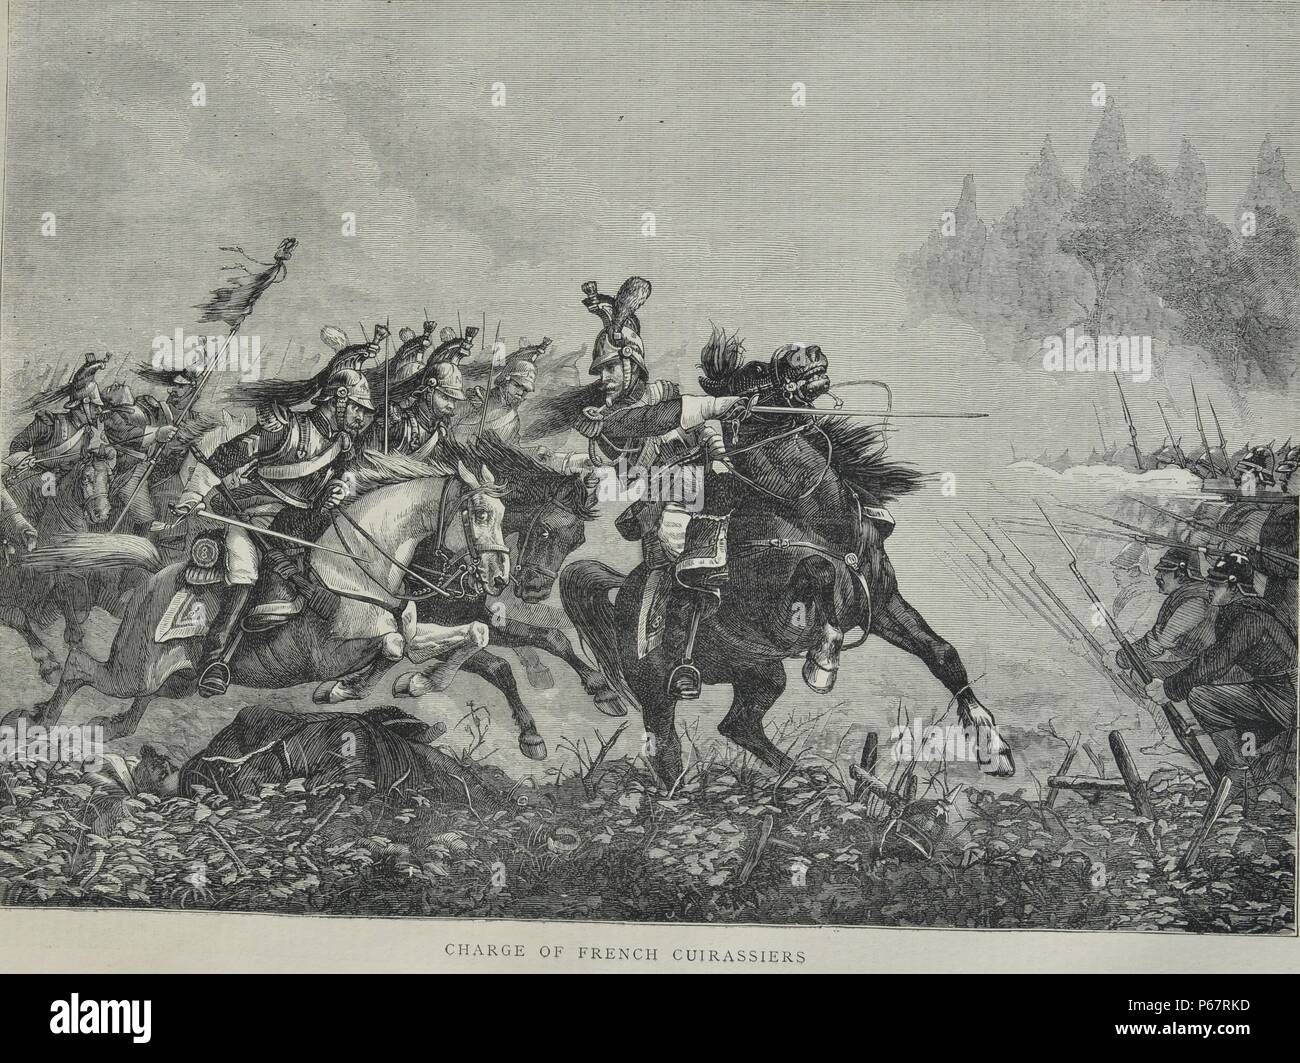 Engraving depicts the charge of French Cuirassiers - a mounted cavalry soldiers equipped with armour and firearms, first appearing in late 15th-century Europe. Dated 1870 Stock Photo